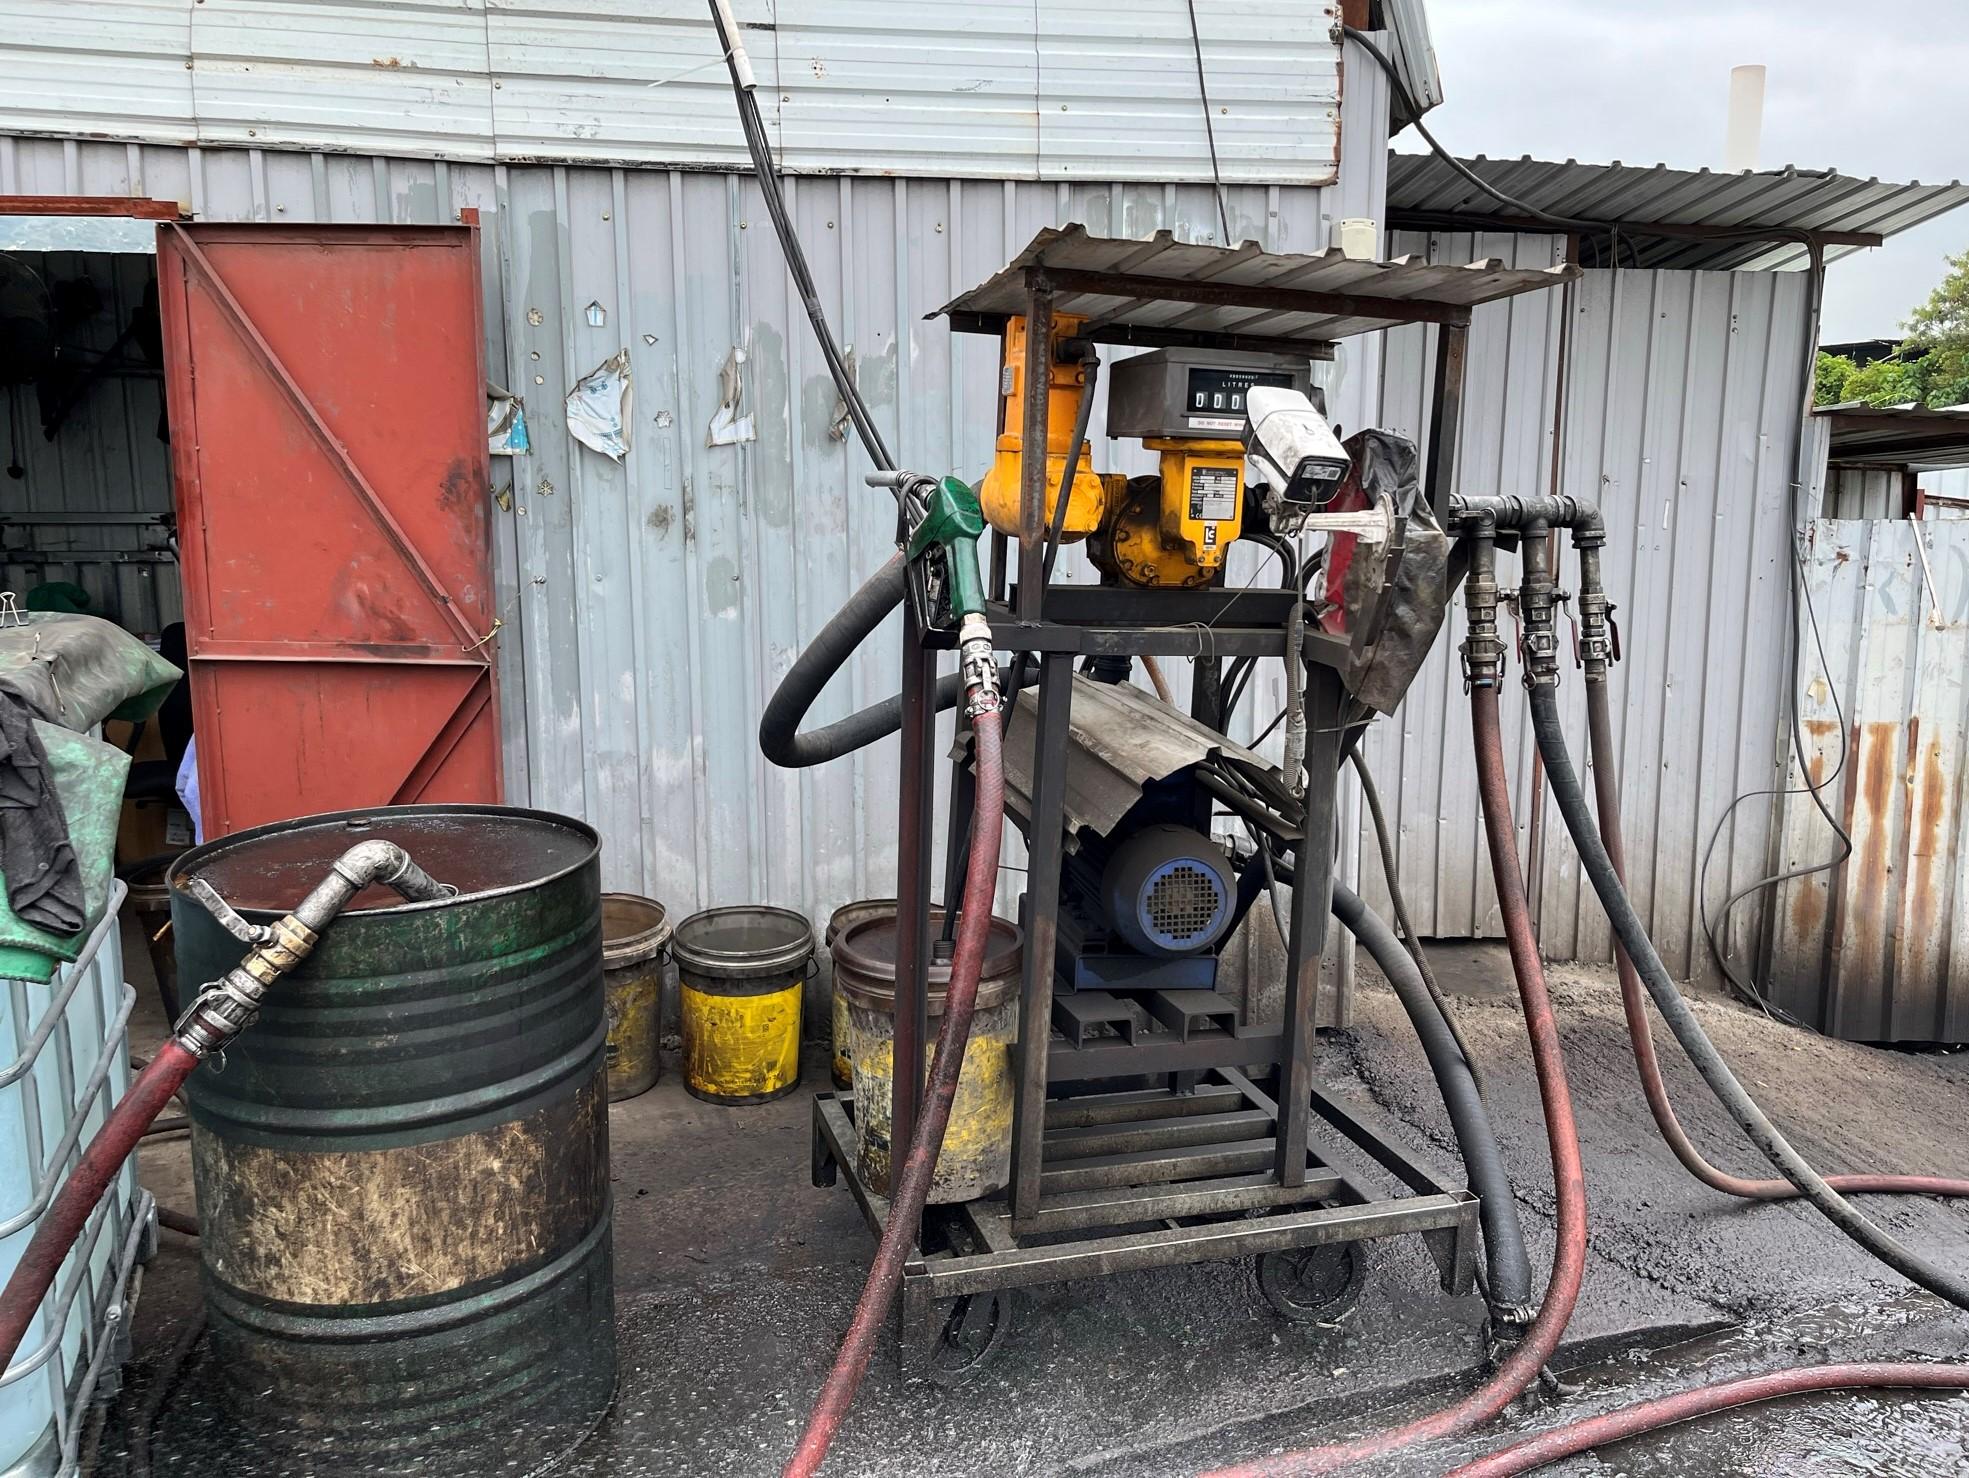 The Fire Services Department (FSD), the Hong Kong Police Force and Hong Kong Customs mounted a territory wide joint operation codenamed "Strong Thunder" to combat illicit fuelling activities today (April 20). Photo shows fuelling facilities at a suspected illegal fuelling station.